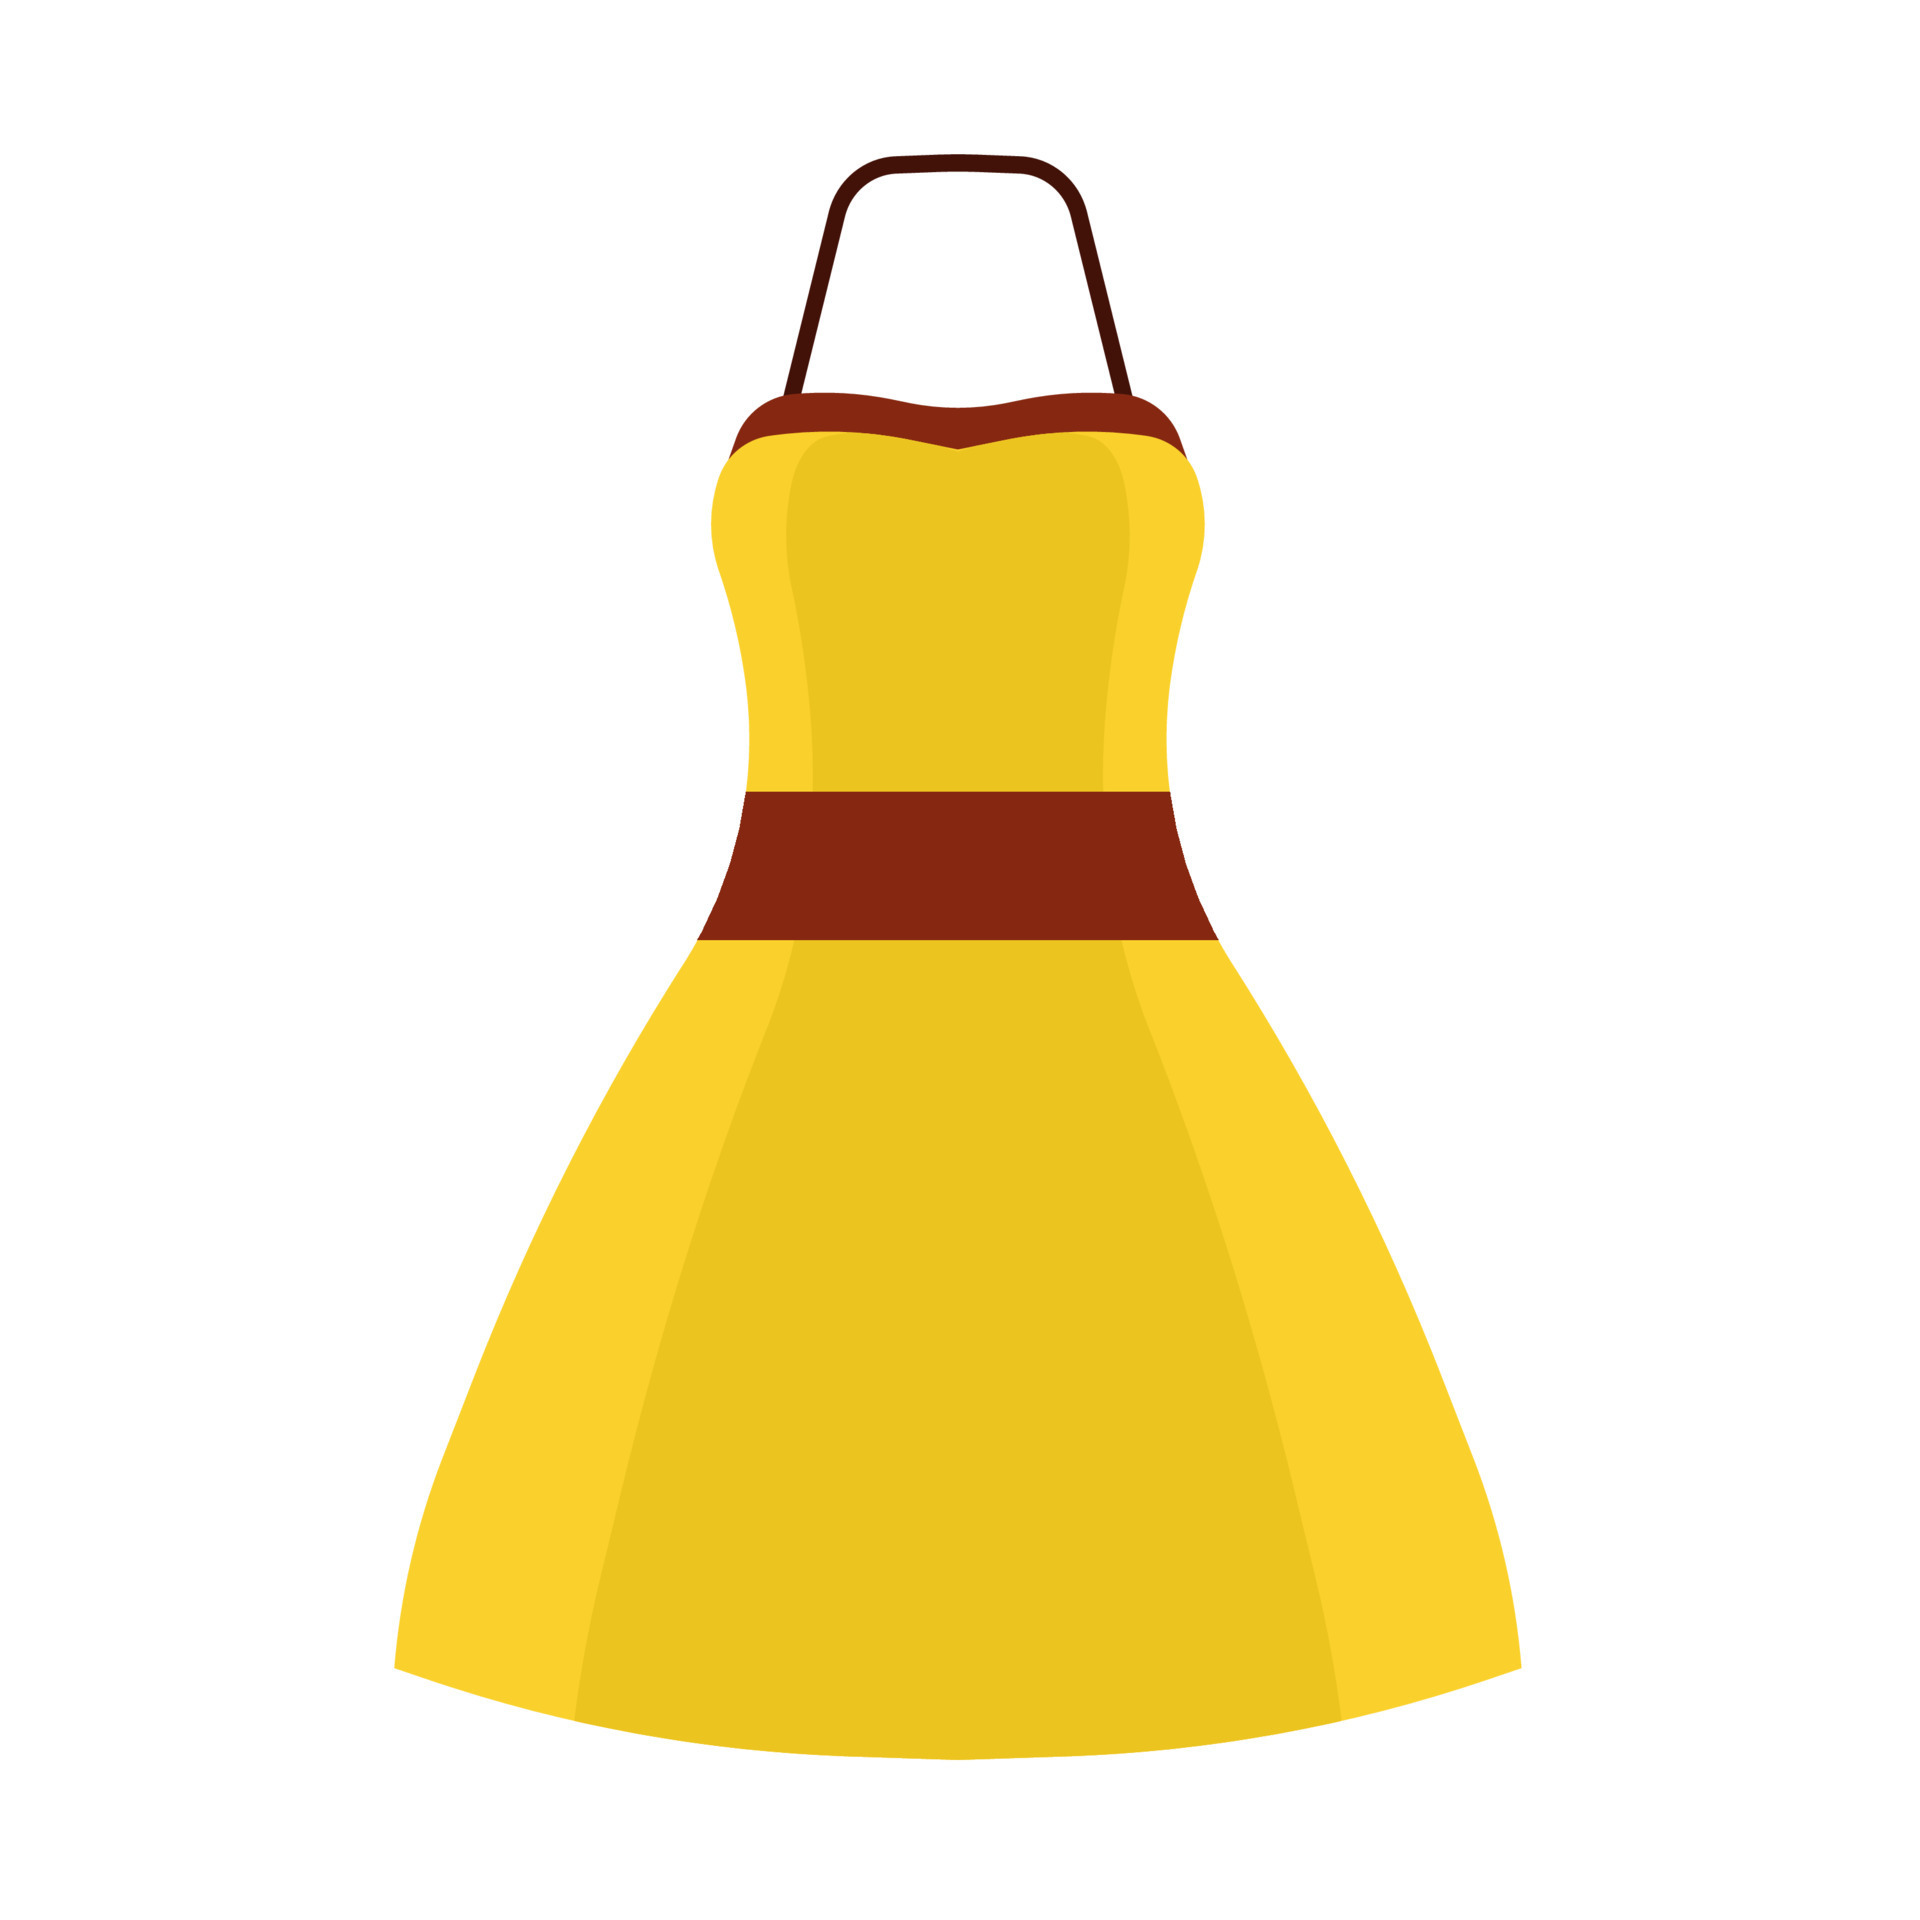 Cute dress woman fashion vector icon. Female beauty person clothes